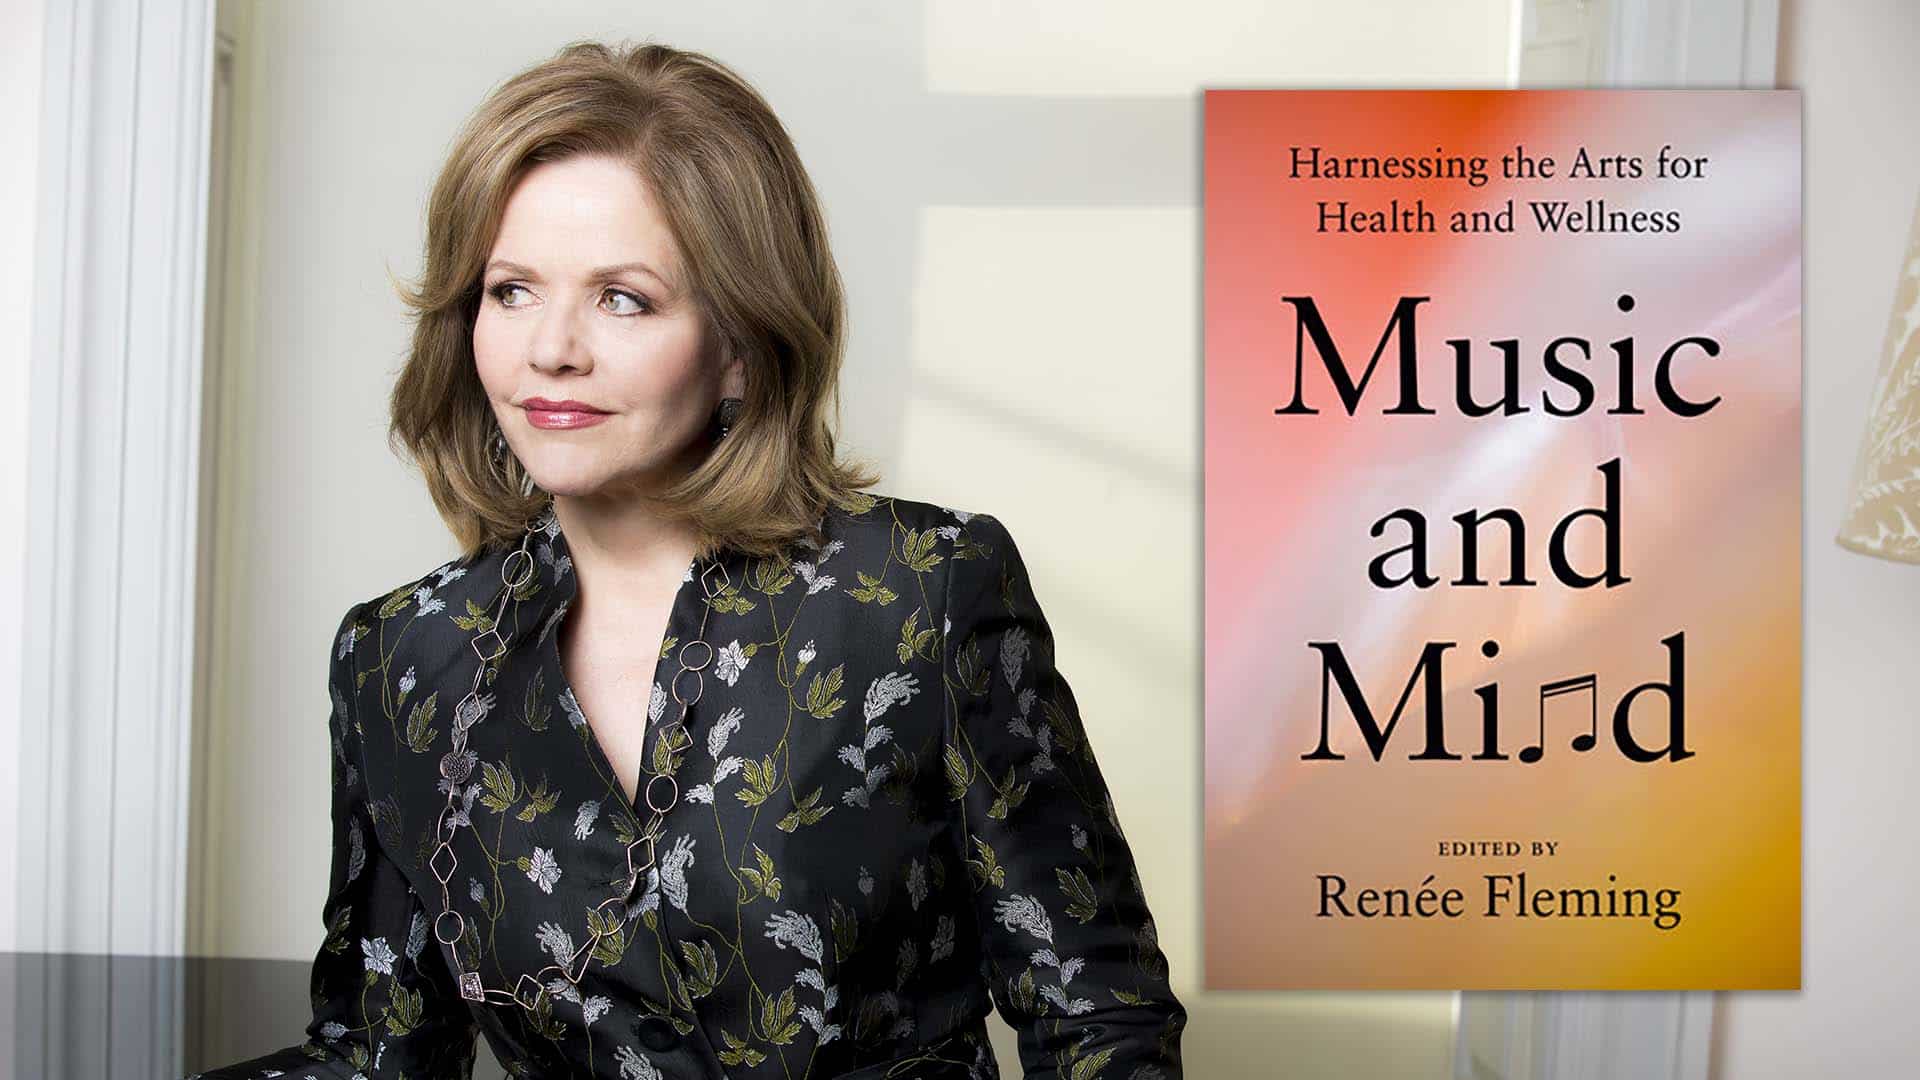 Renee Fleming’s new book: Selected quotes